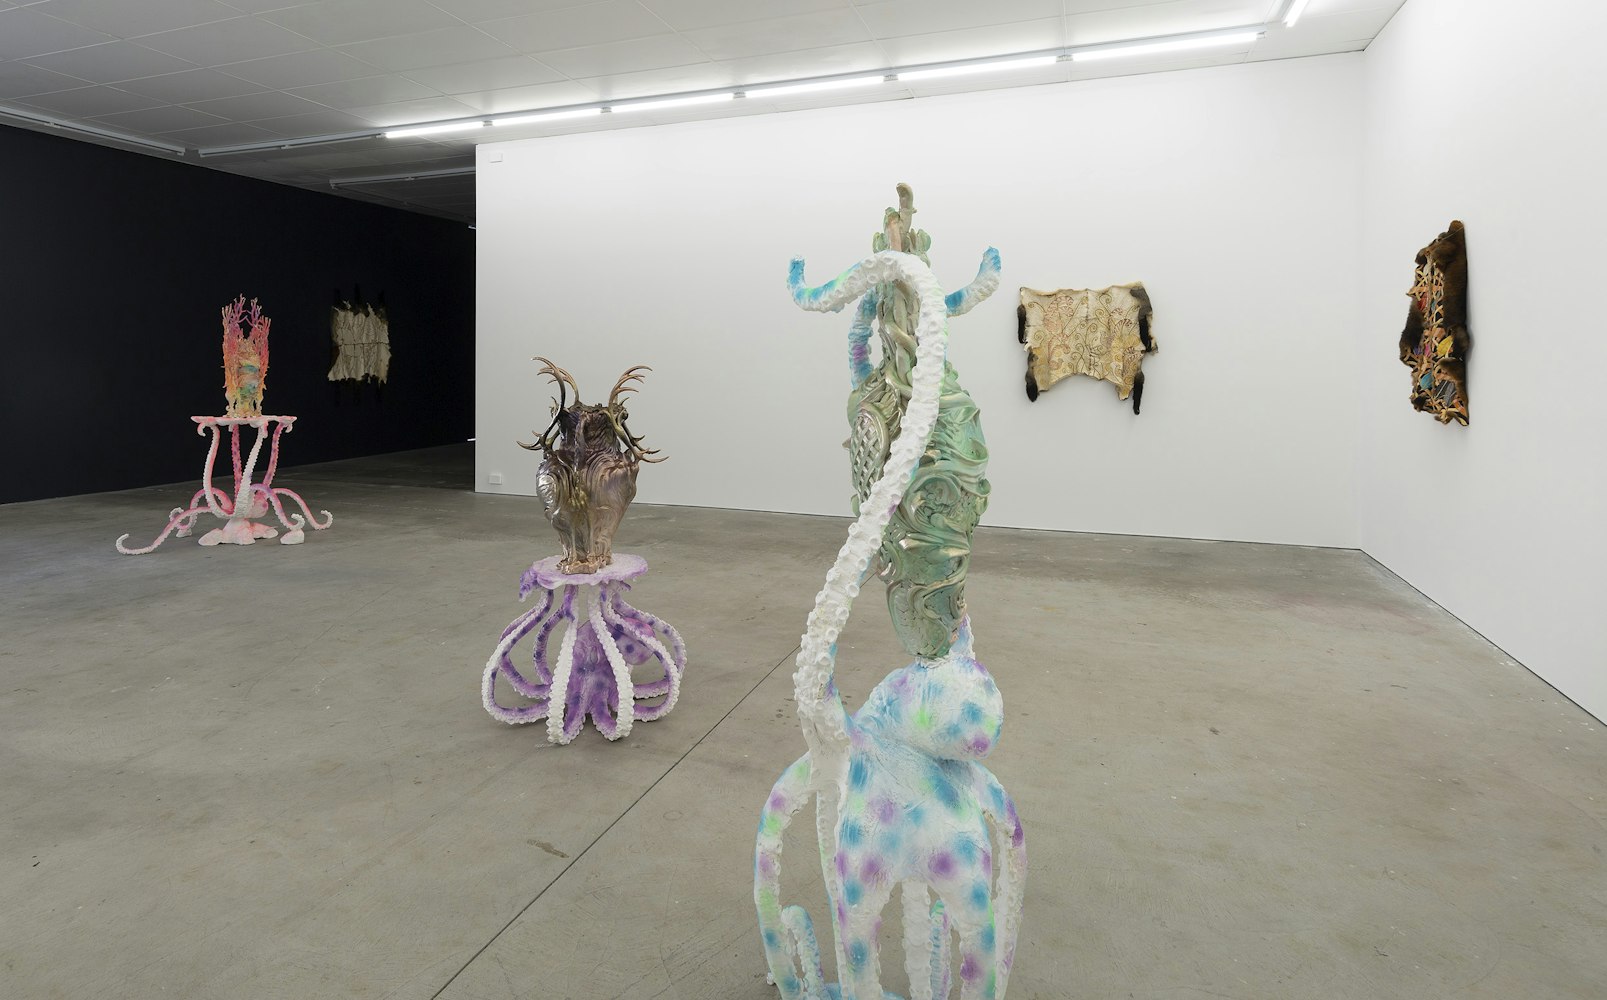 Installation view of Octopus 22: Baroquetopus curated by Tessa Laird, featuring work by Peter Waples-Crowe, Kate Rohde and Gina Bundle, presented at Gertrude Contemporary 2022. Photo: Christian Capurro. 